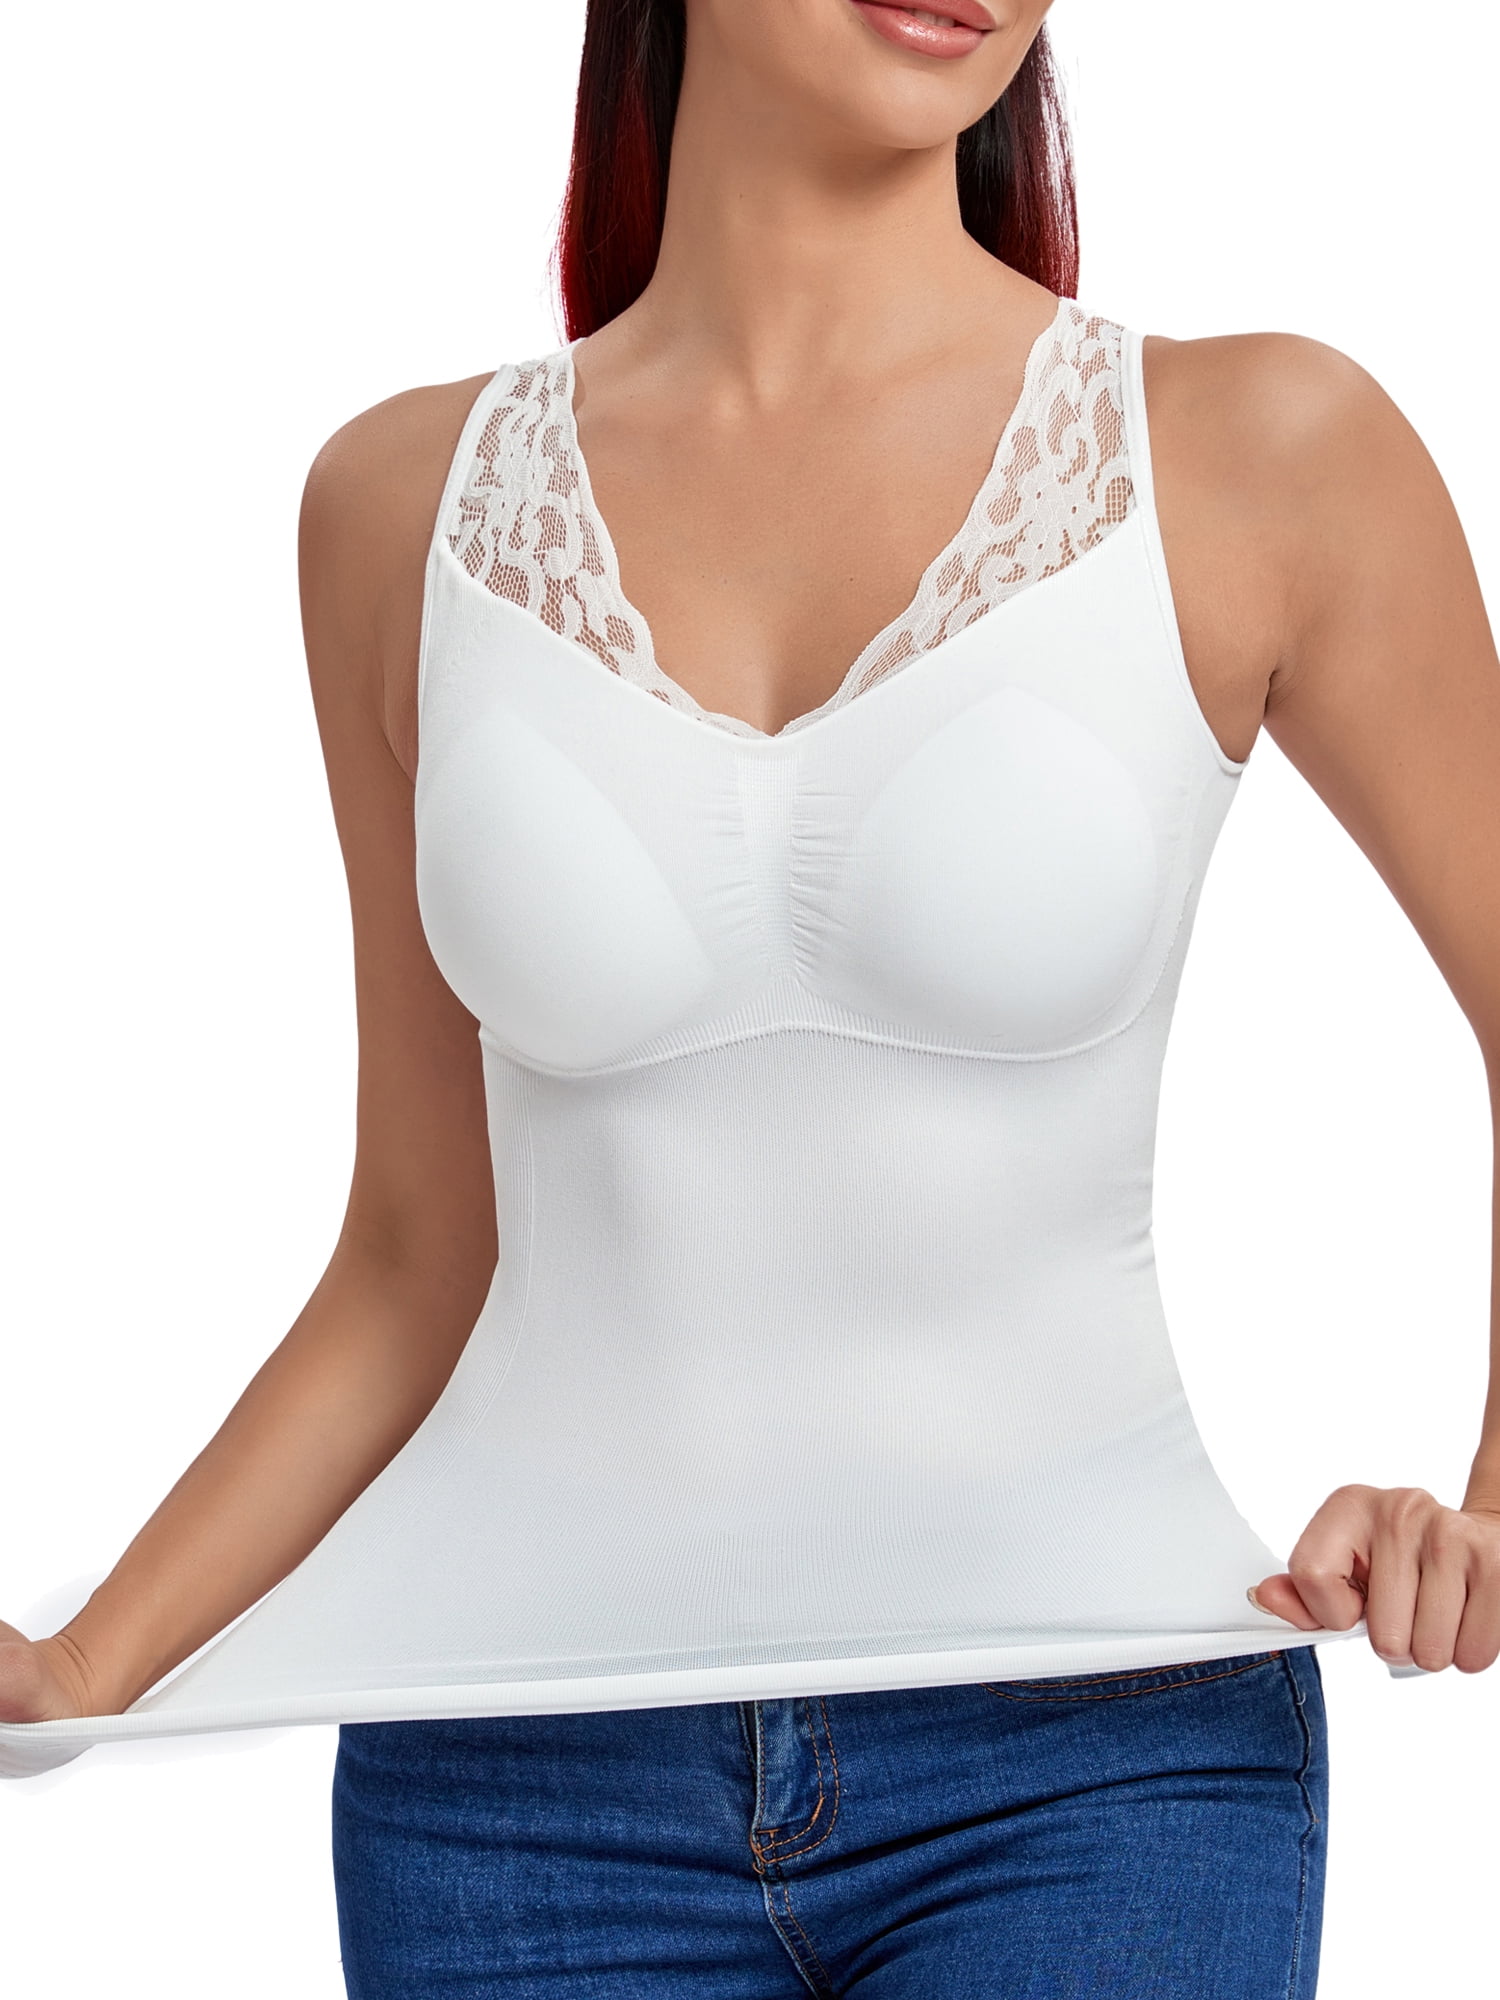 SLIMBELLE Womens Padded Camisole with Lace Cami Tummy Control